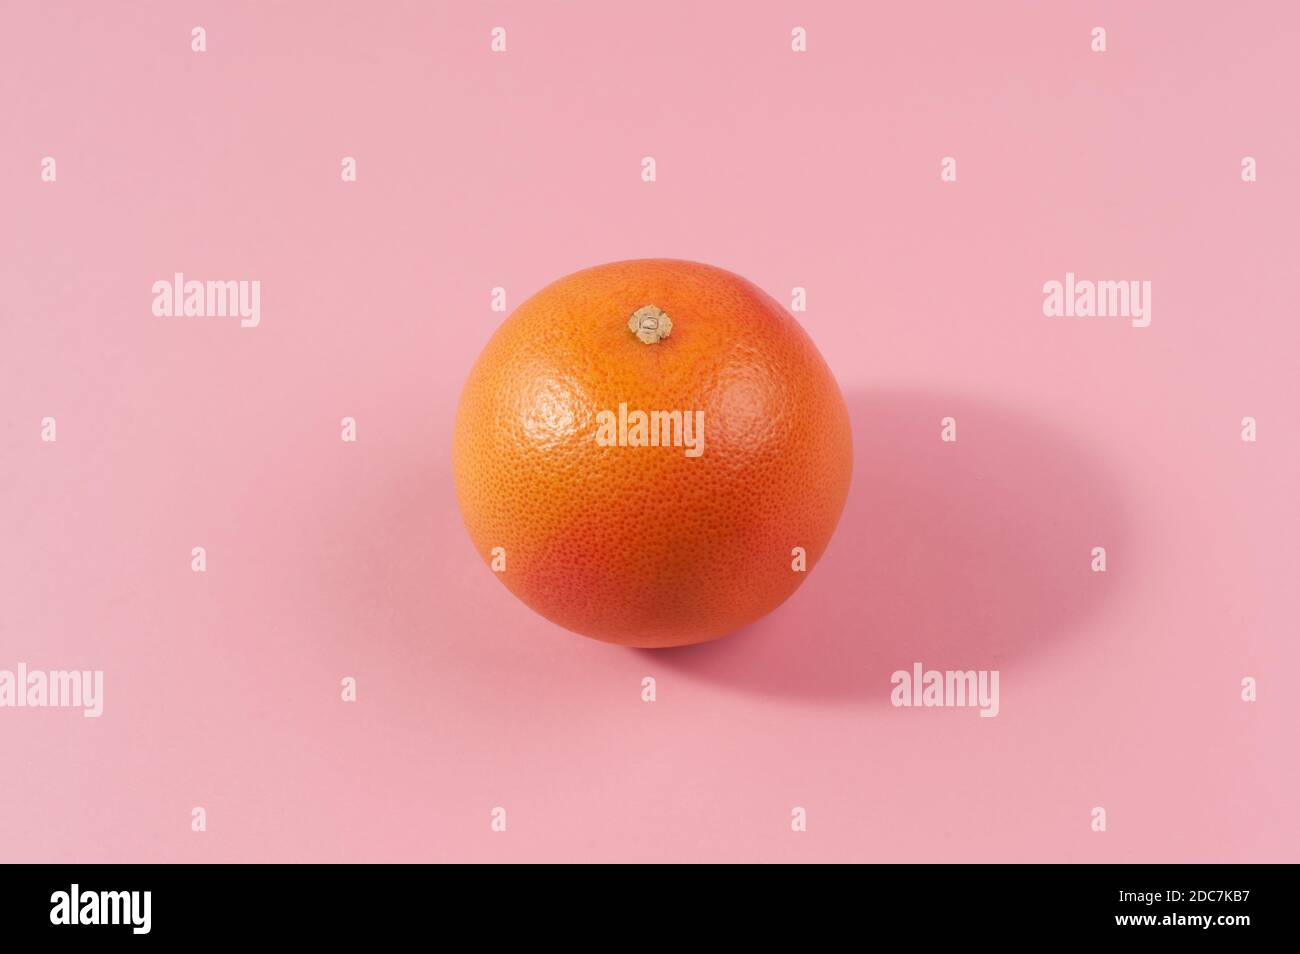 Creative background made with grapefruit citrus fruit  and shadow on the bright  pink background. Minimal image  concept. Stock Photo